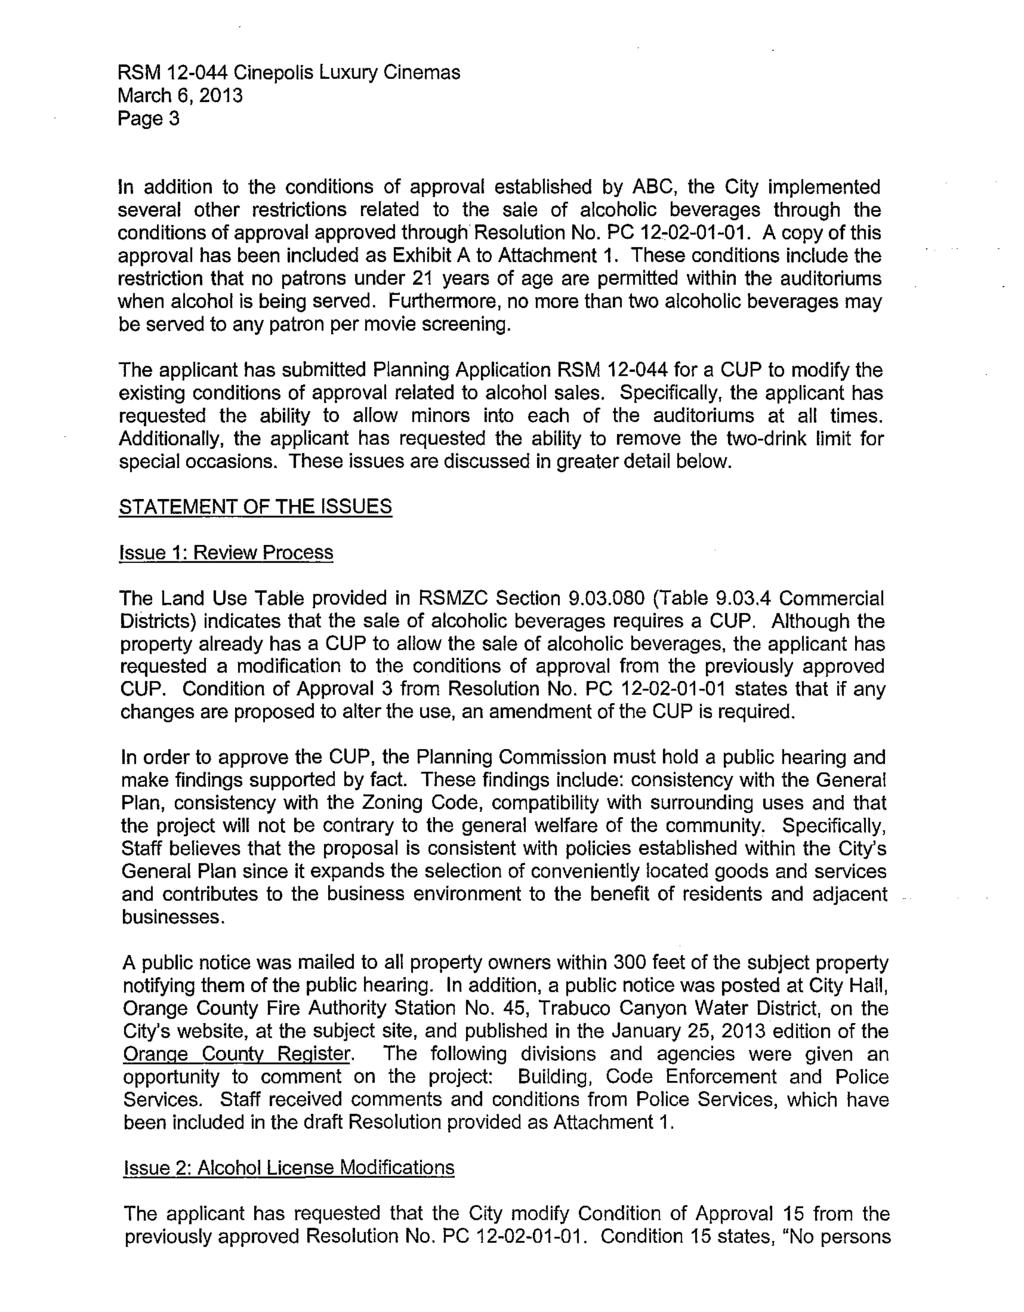 RSM 12-044 Cinepolis Luxury Cinemas March 6, 2013 Page 3 In addition to the conditions of approval established by ABC, the City implemented several other restrictions related to the sale of alcoholic